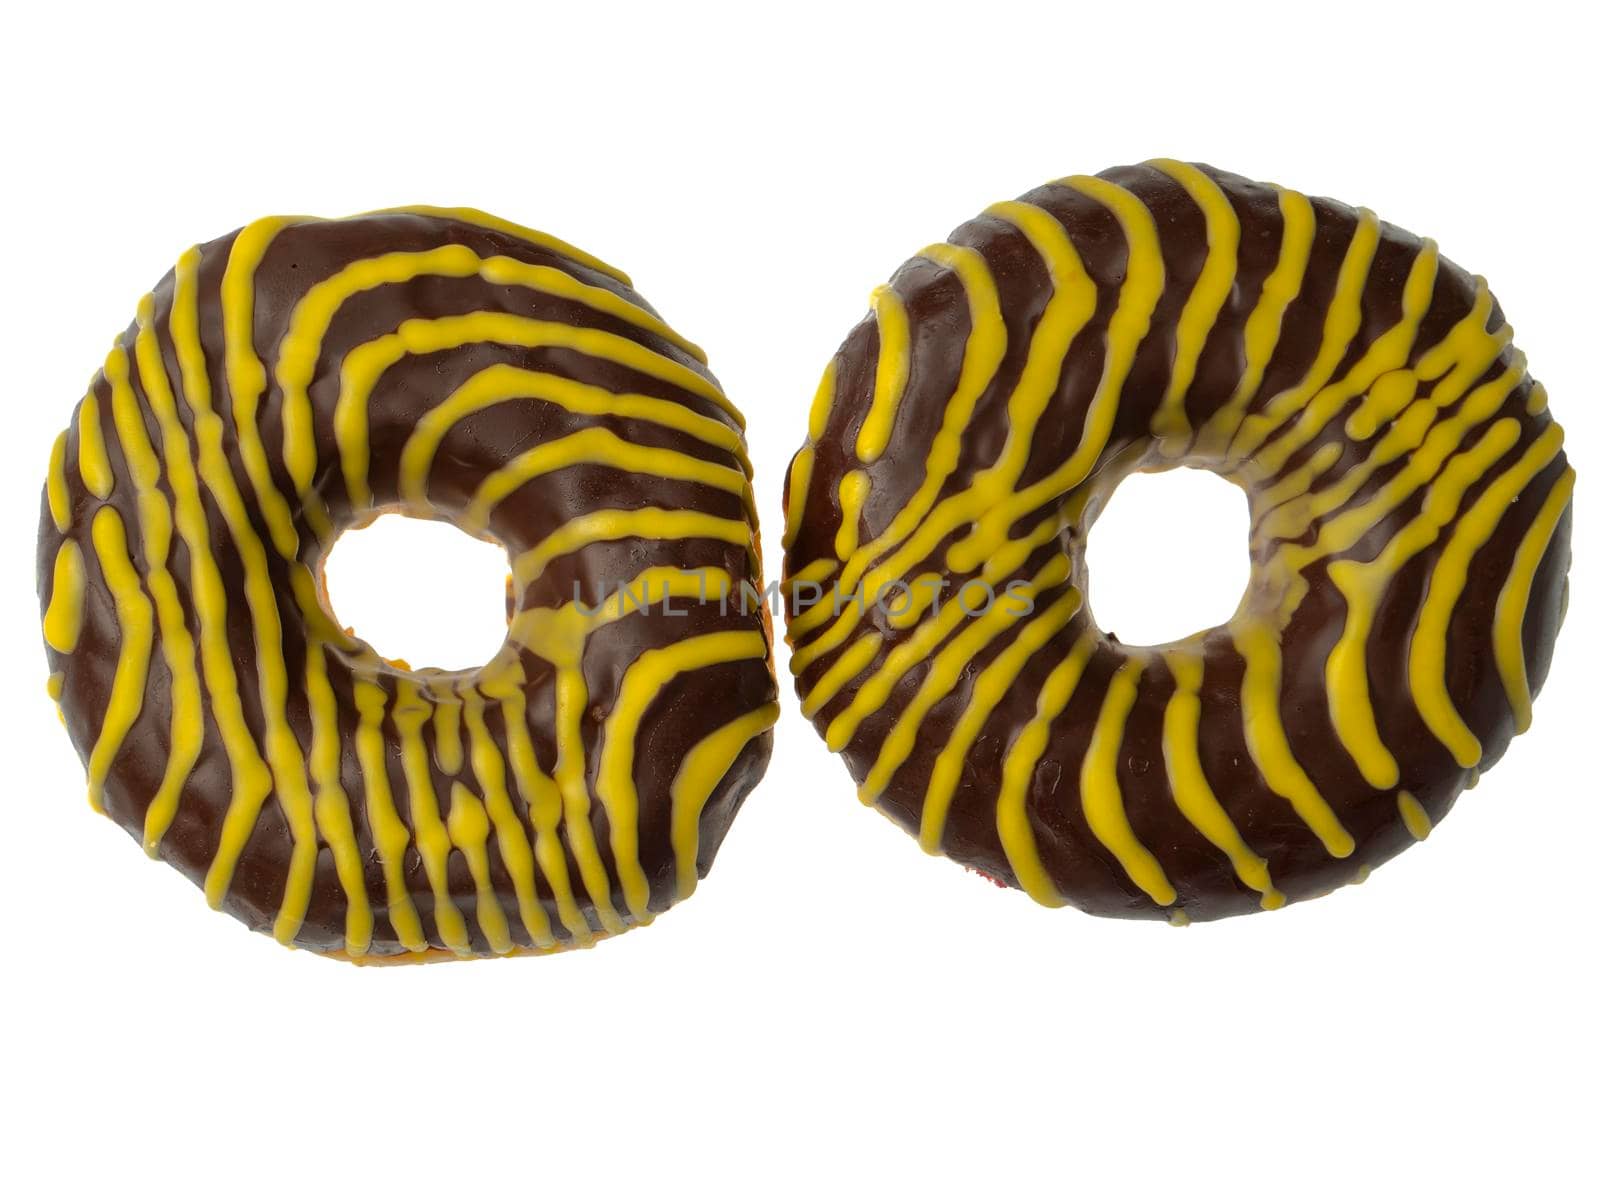 Two American donuts covered with chocolate and with yellow stripes on a white background in isolation